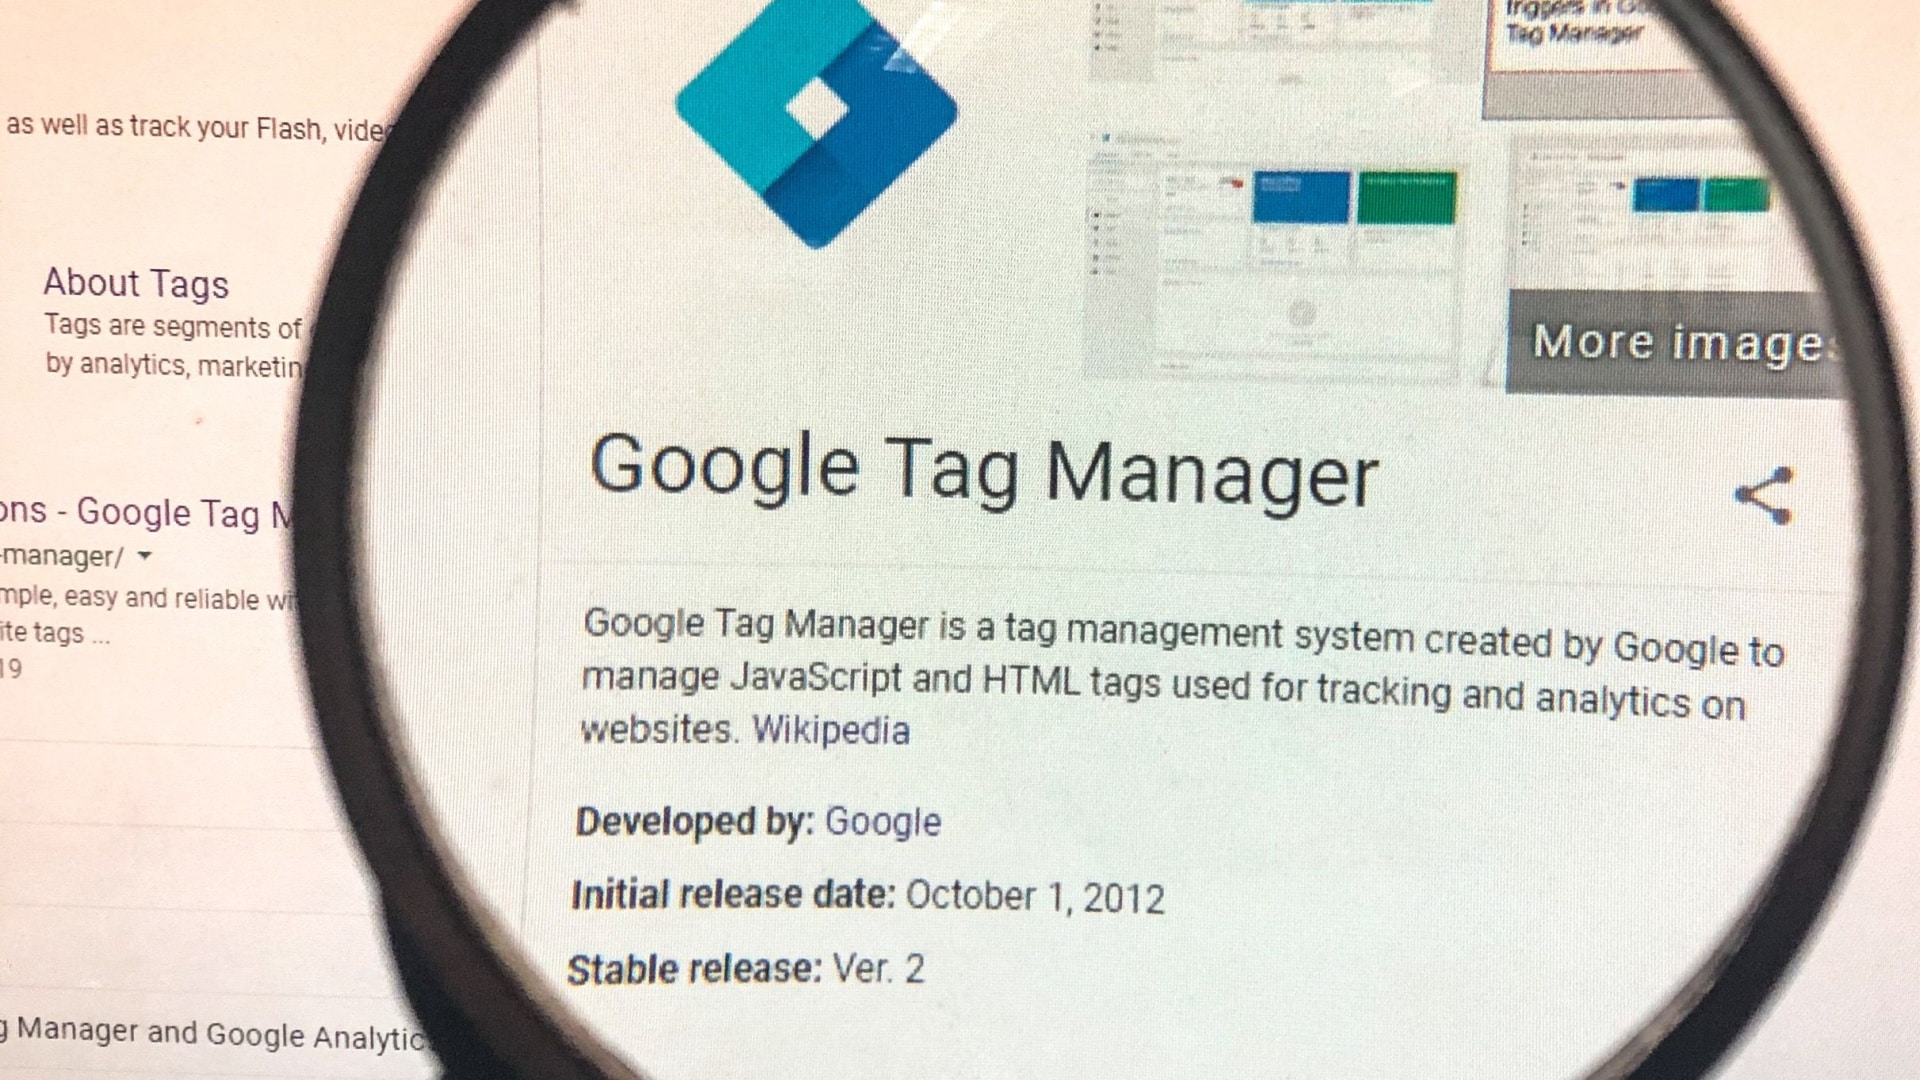 CMS integration and 2 other new Google tag feature updates